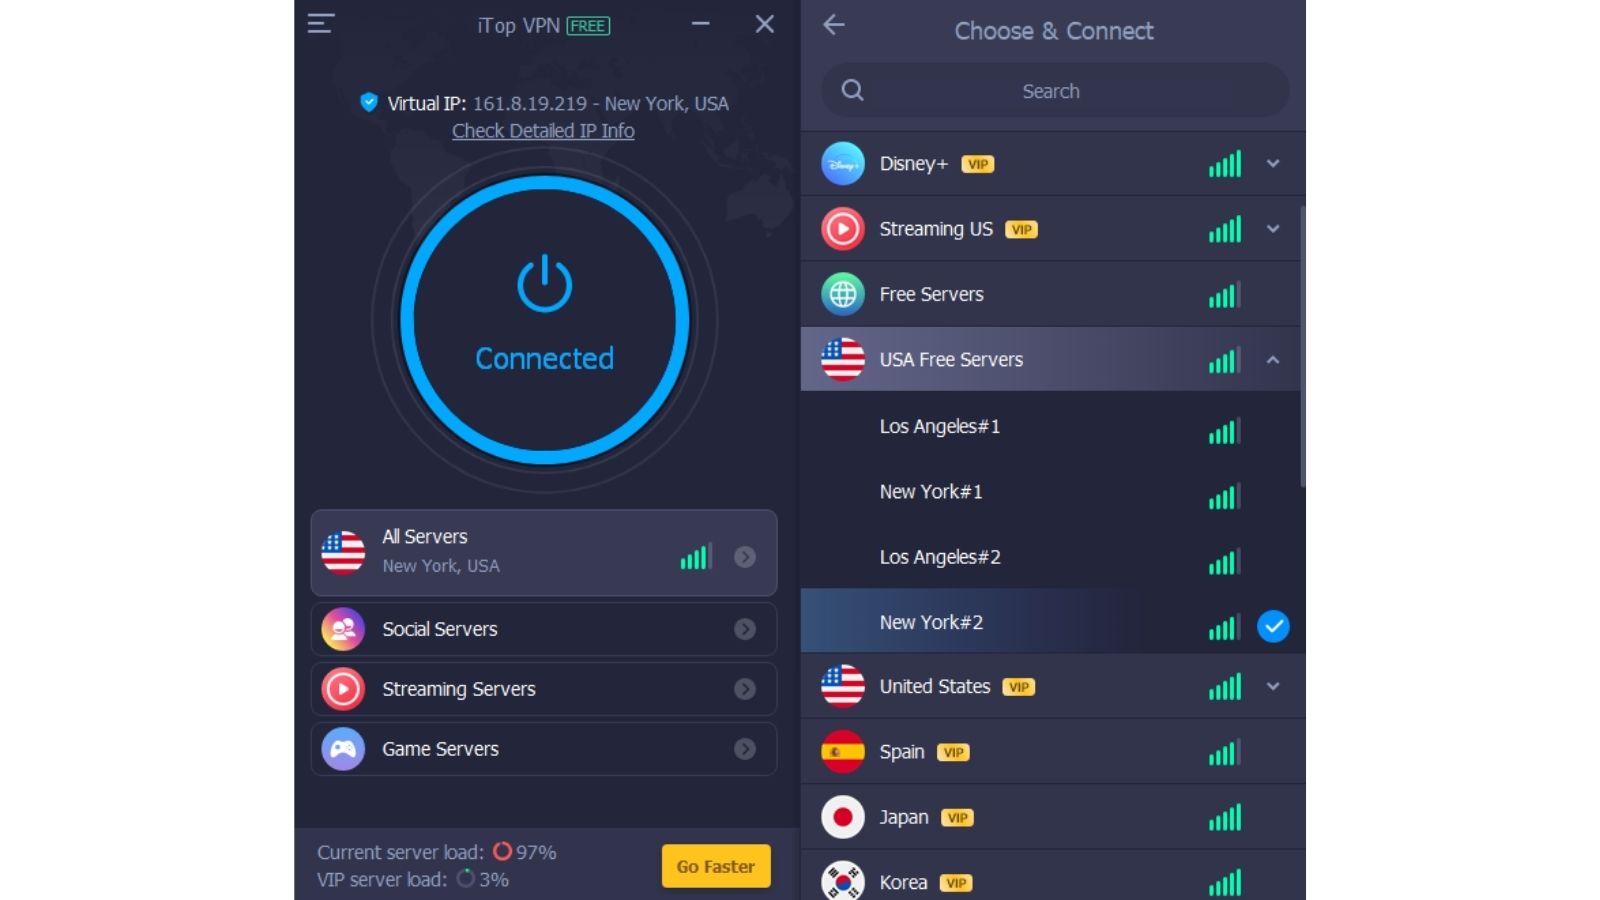 Find pricing, reviews and other details about iTop VPN